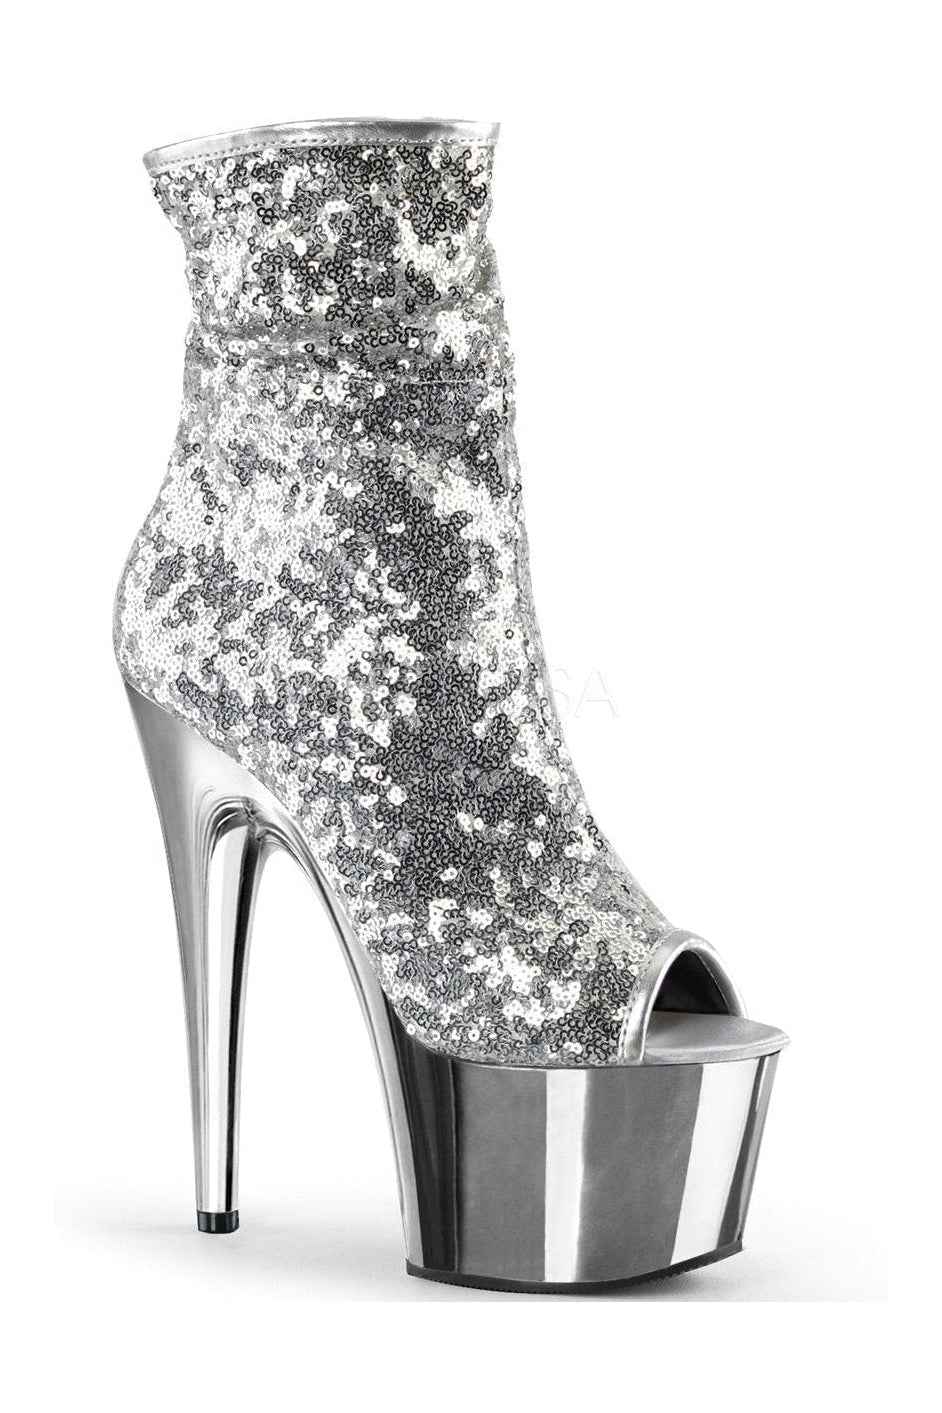 Pleaser Silver Ankle Boots Platform Stripper Shoes | Buy at Sexyshoes.com